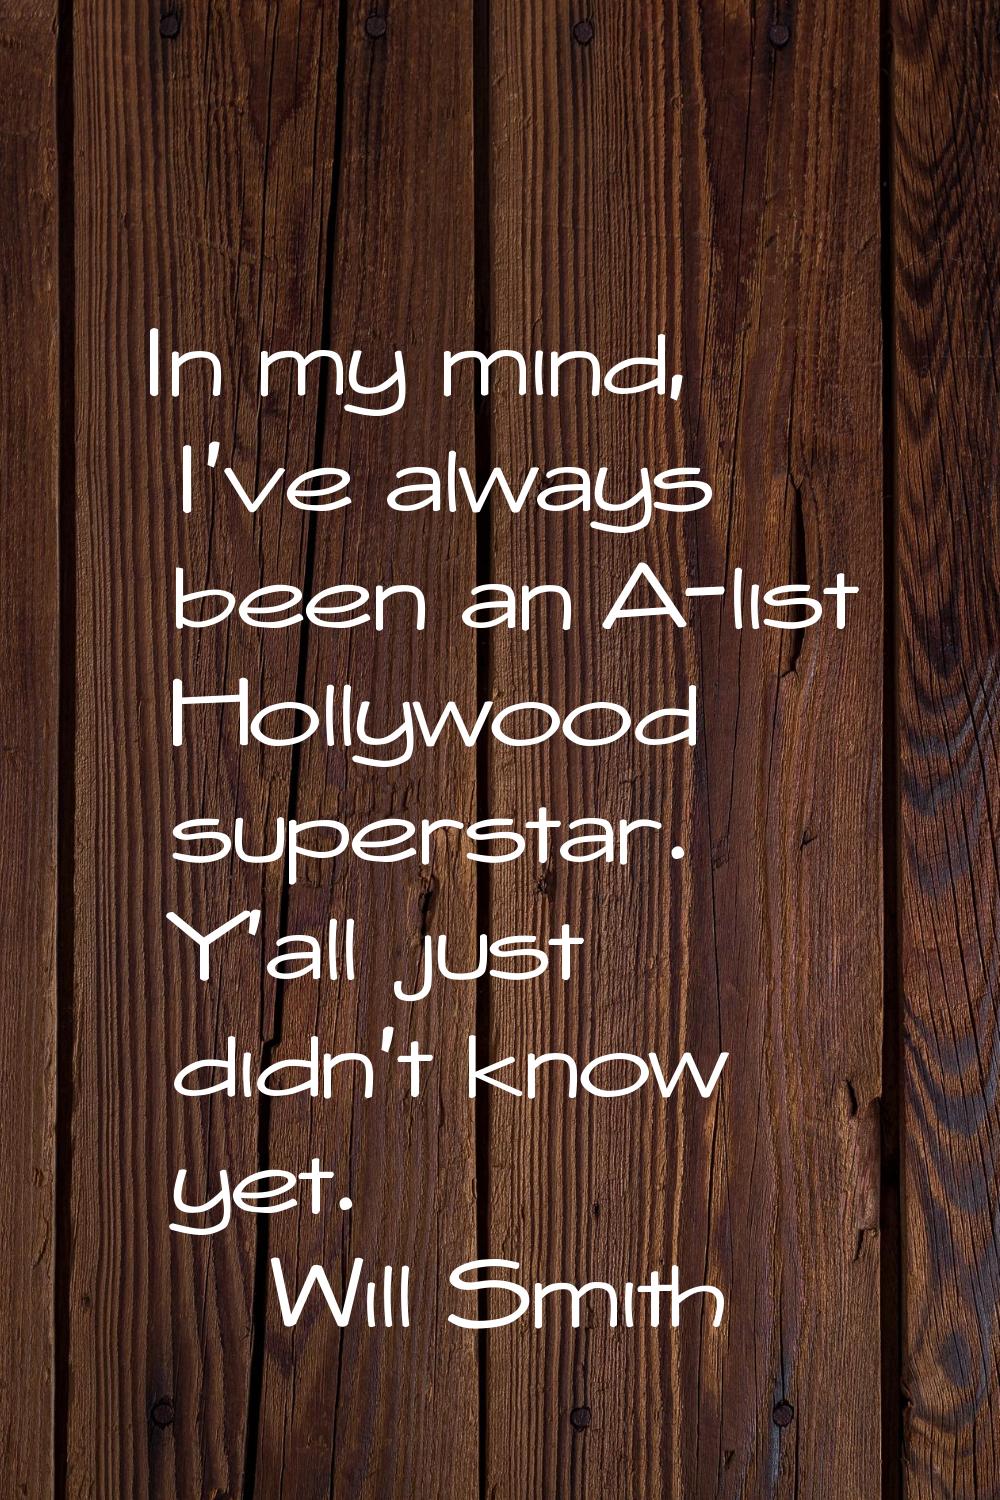 In my mind, I've always been an A-list Hollywood superstar. Y'all just didn't know yet.